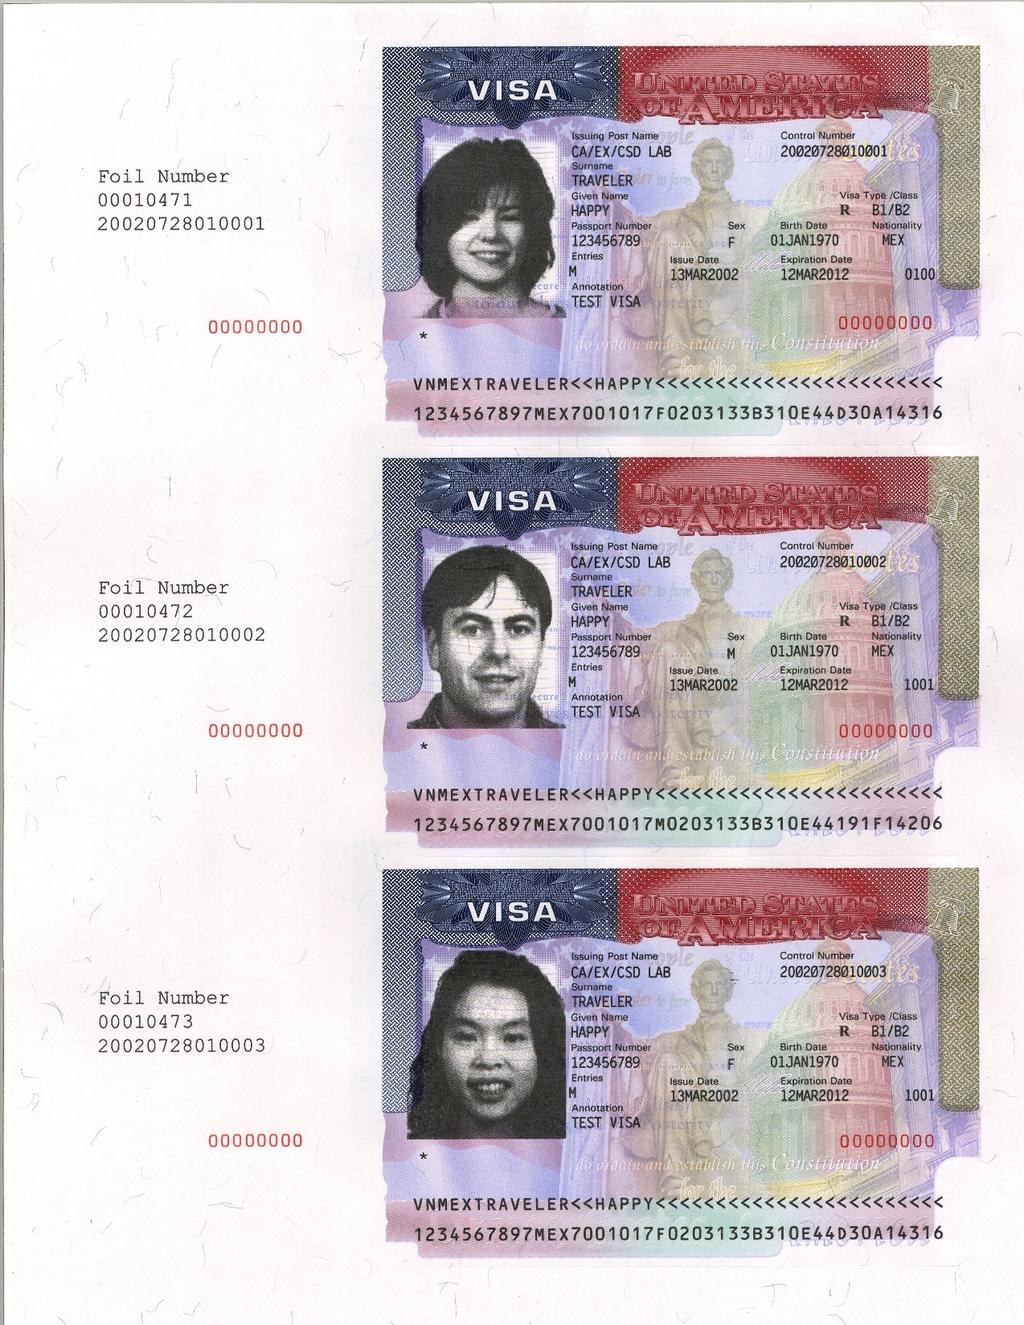 What is a Visa?